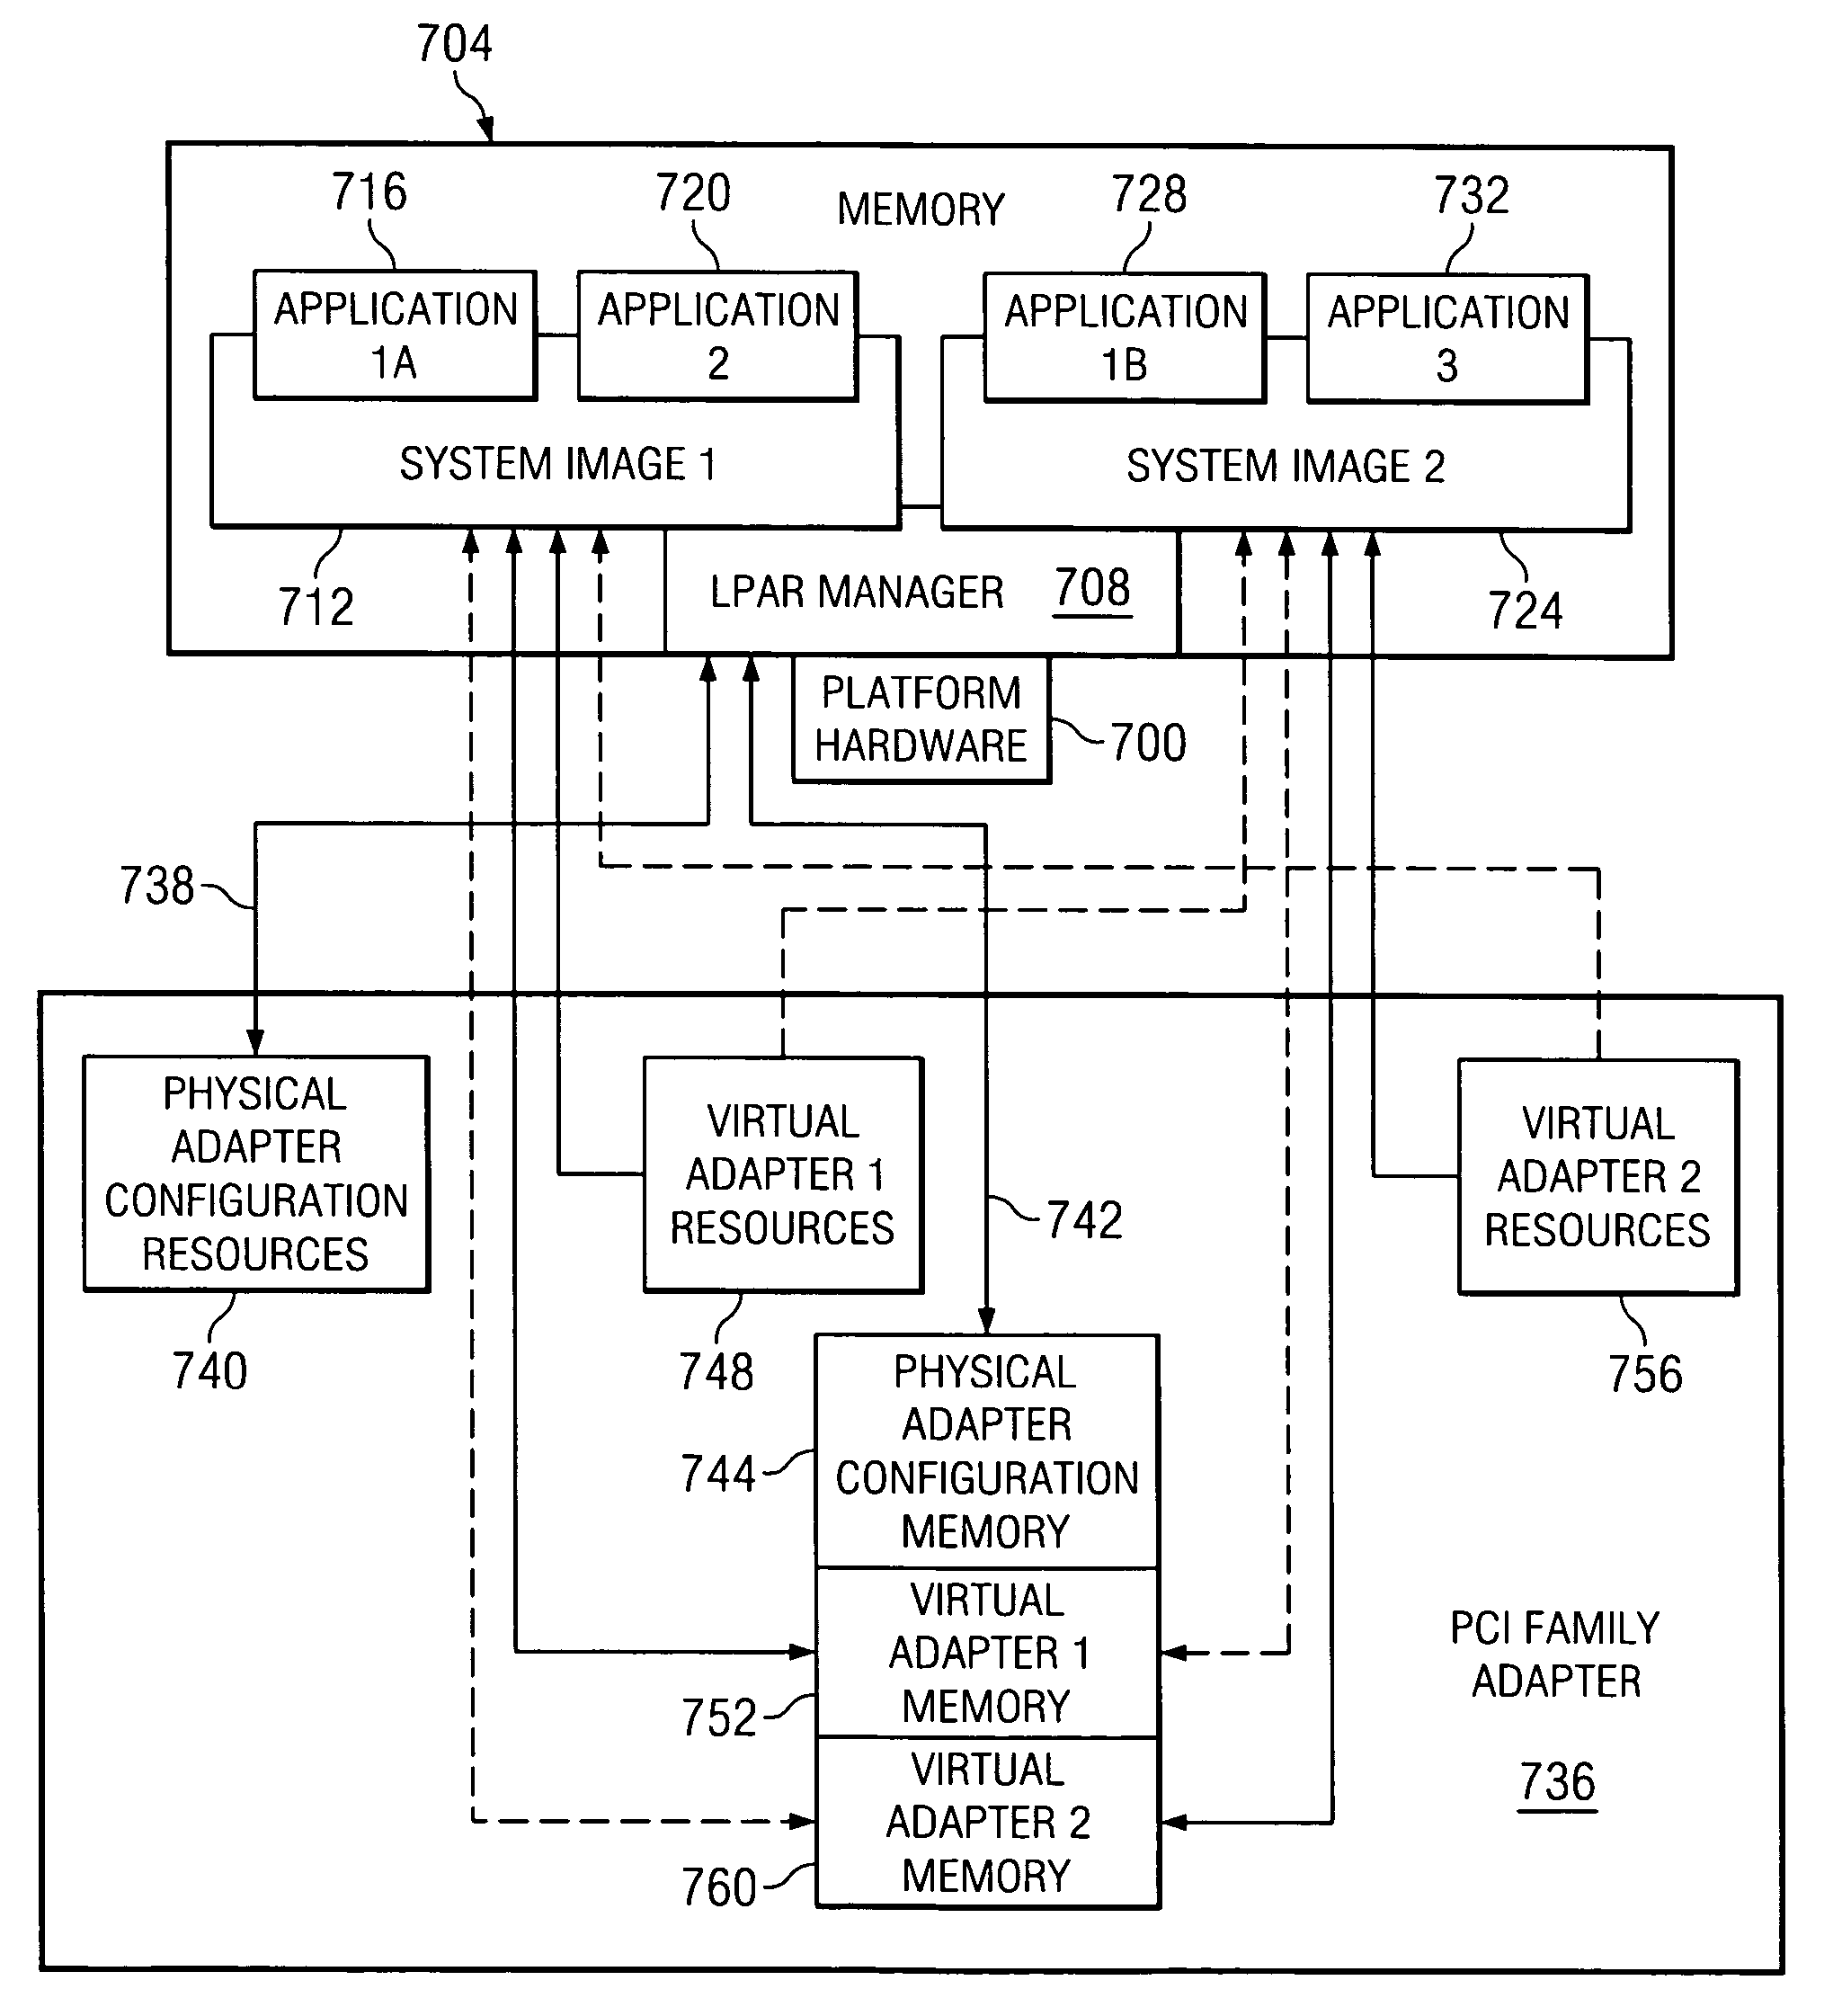 Association of host translations that are associated to an access control level on a PCI bridge that supports virtualization